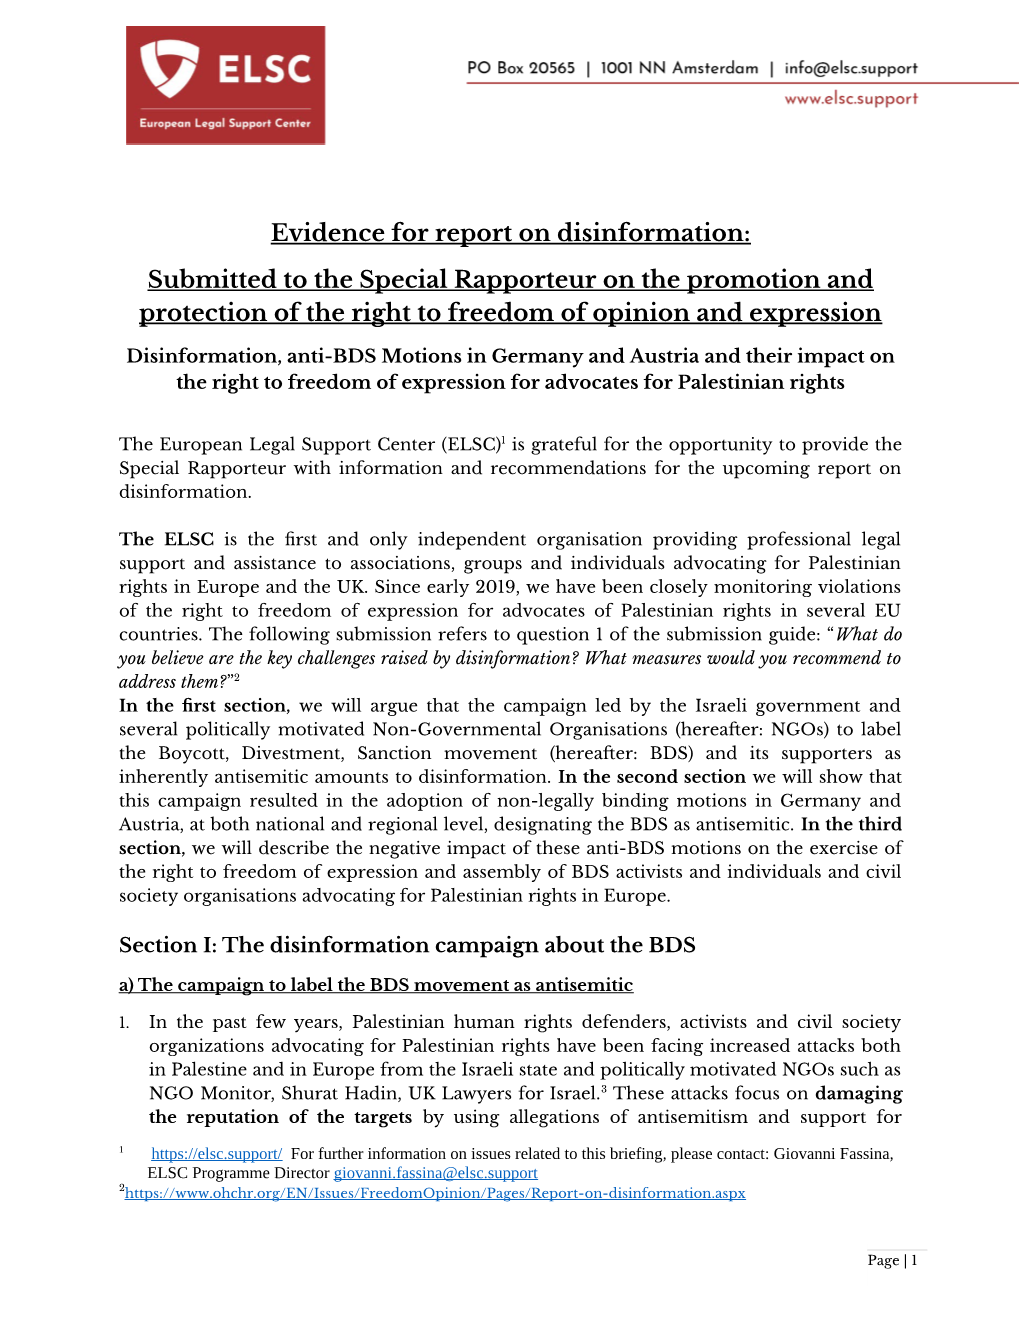 Evidence for Report on Disinformation: Submitted to the Special Rapporteur on the Promotion and Protection of the Right to Freedom of Opinion and Expression